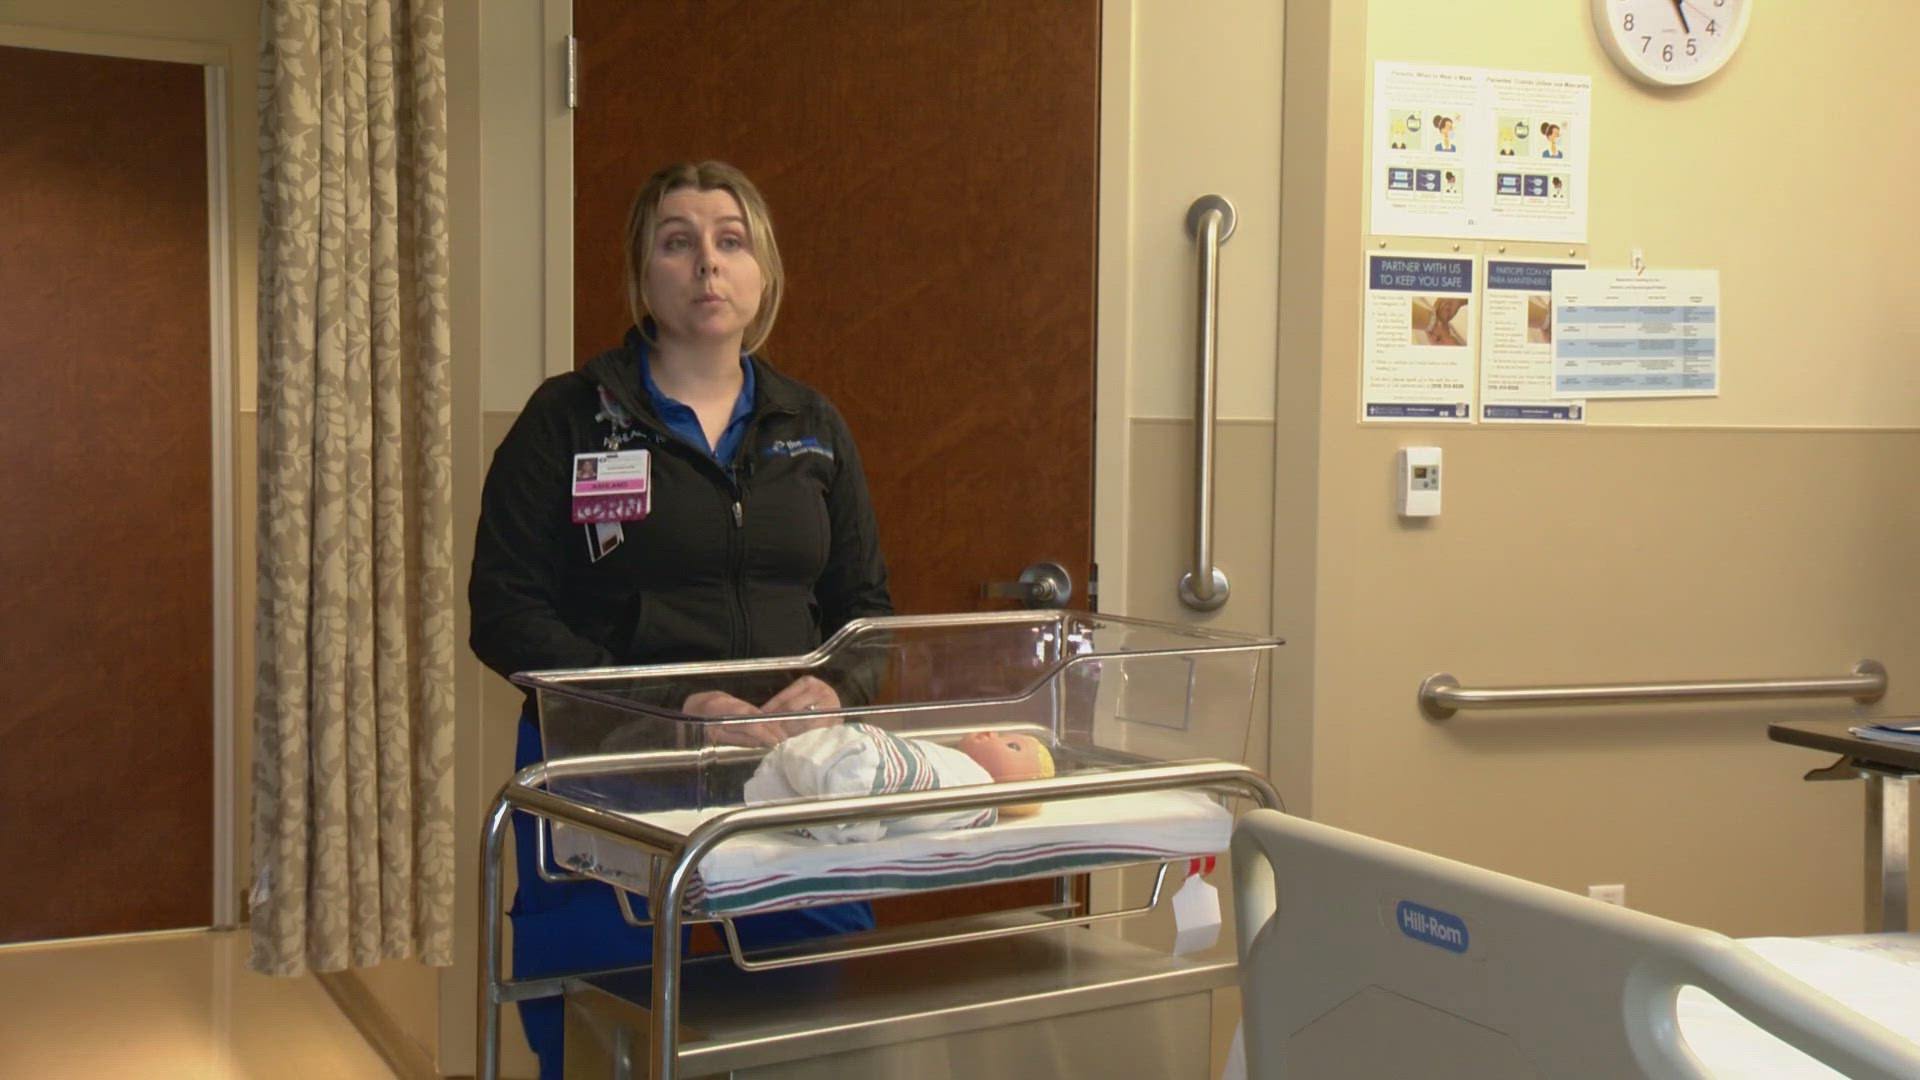 A local nurse shares tips on how you can keep your baby safe using the "ABCs."